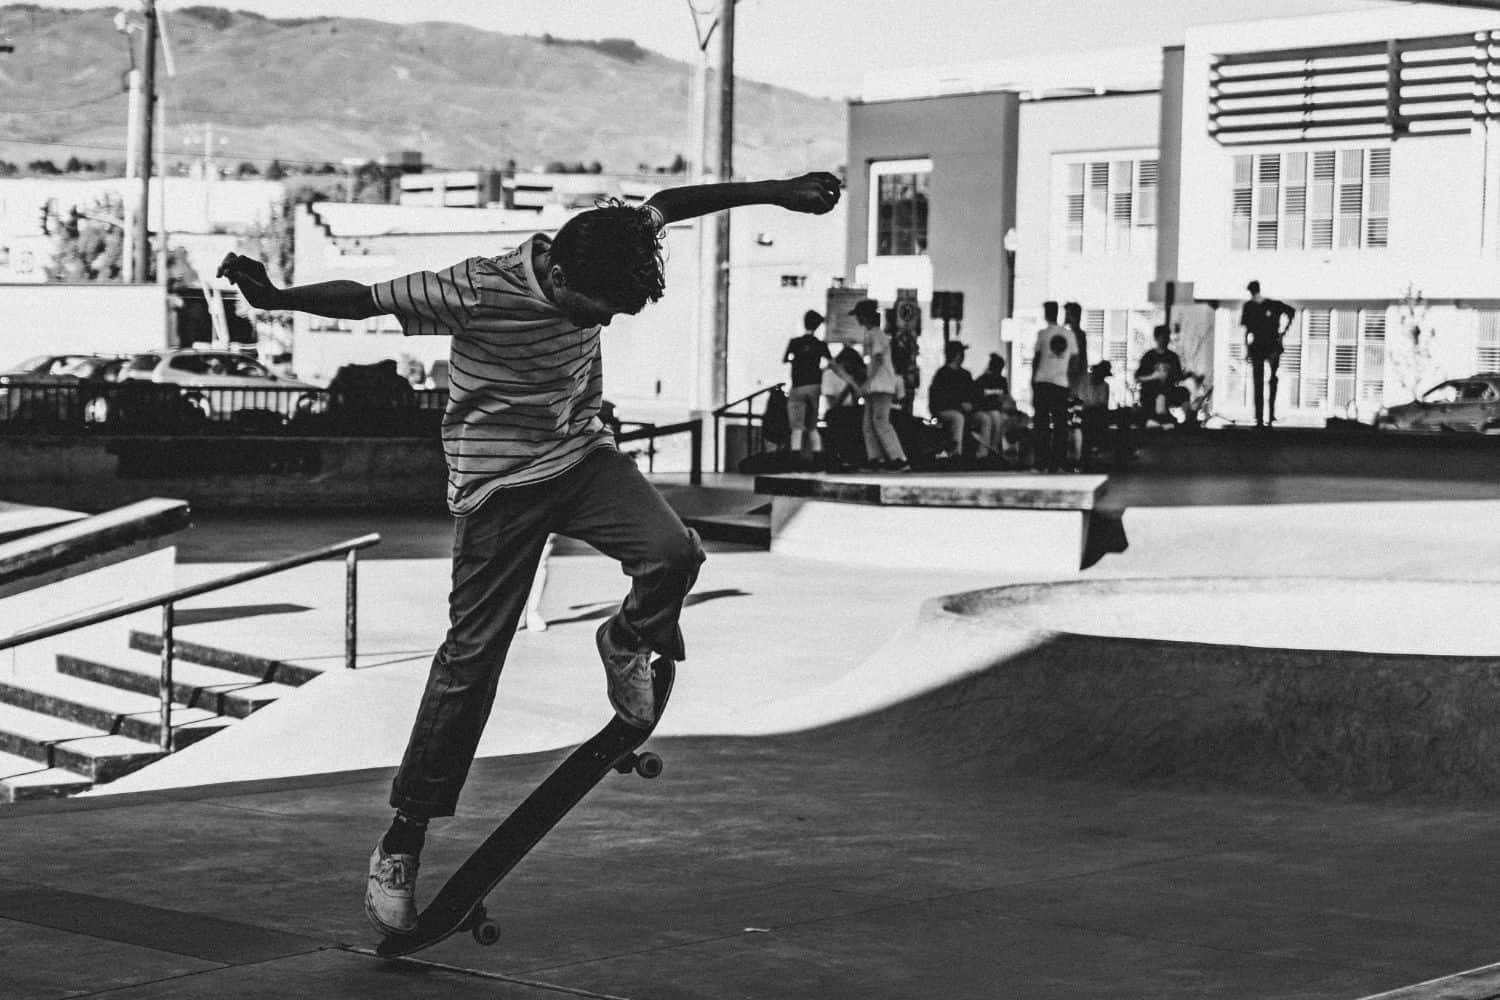 educating skateboard basics to conquer the fear of skateboarding